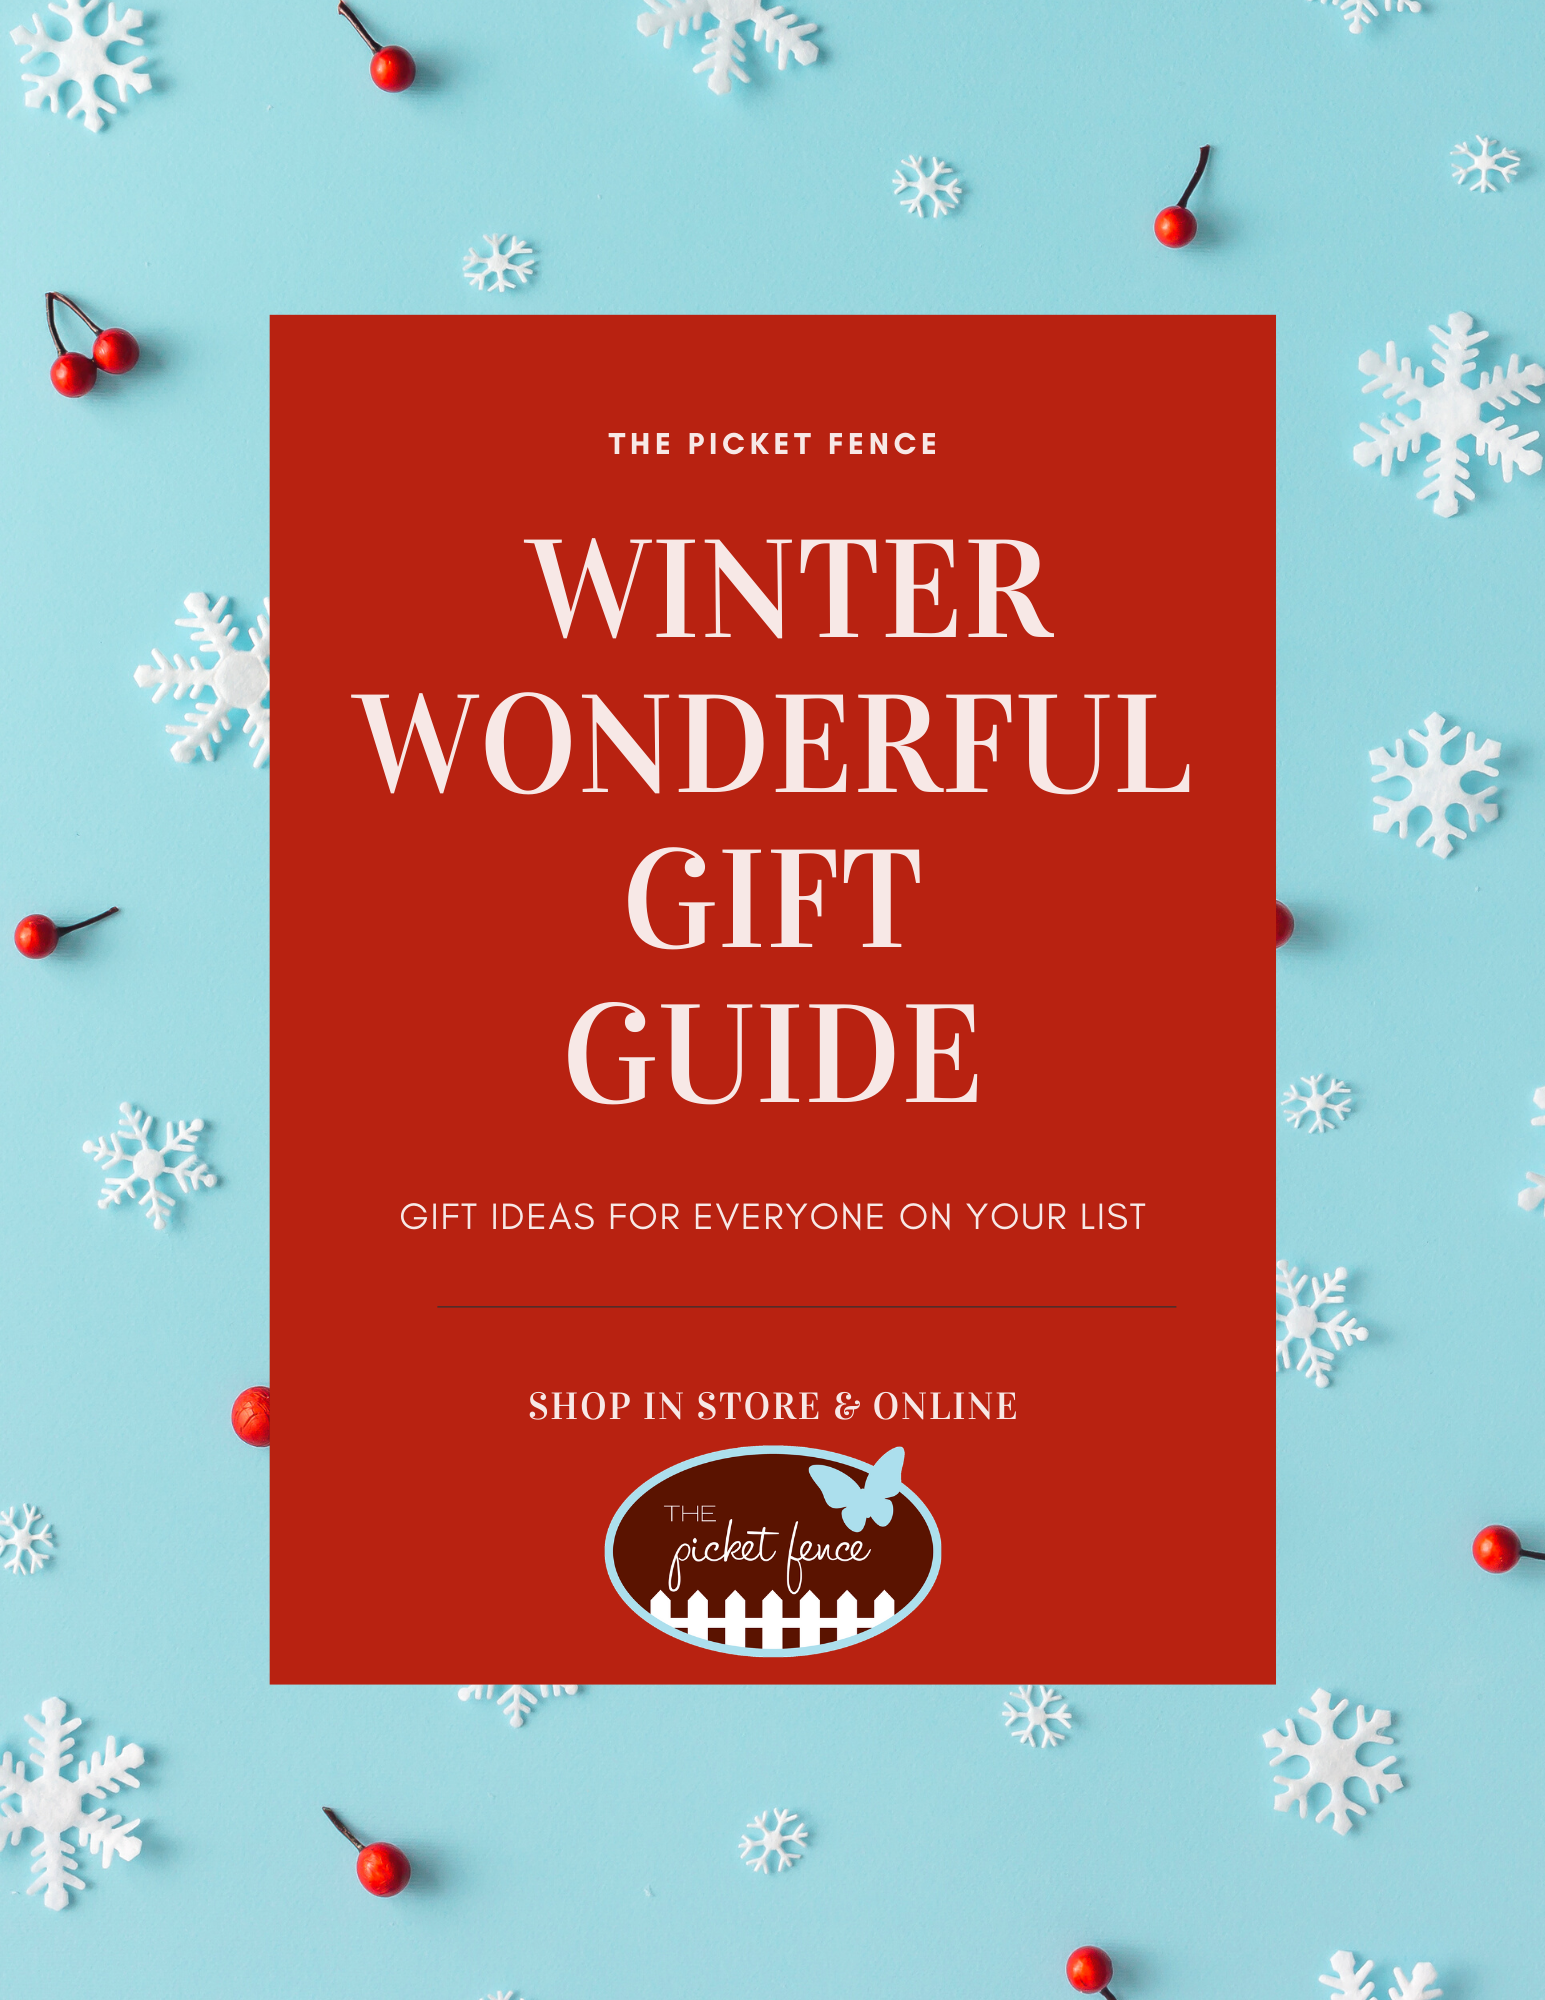 Winter Wonderful Gift Guide is Here!